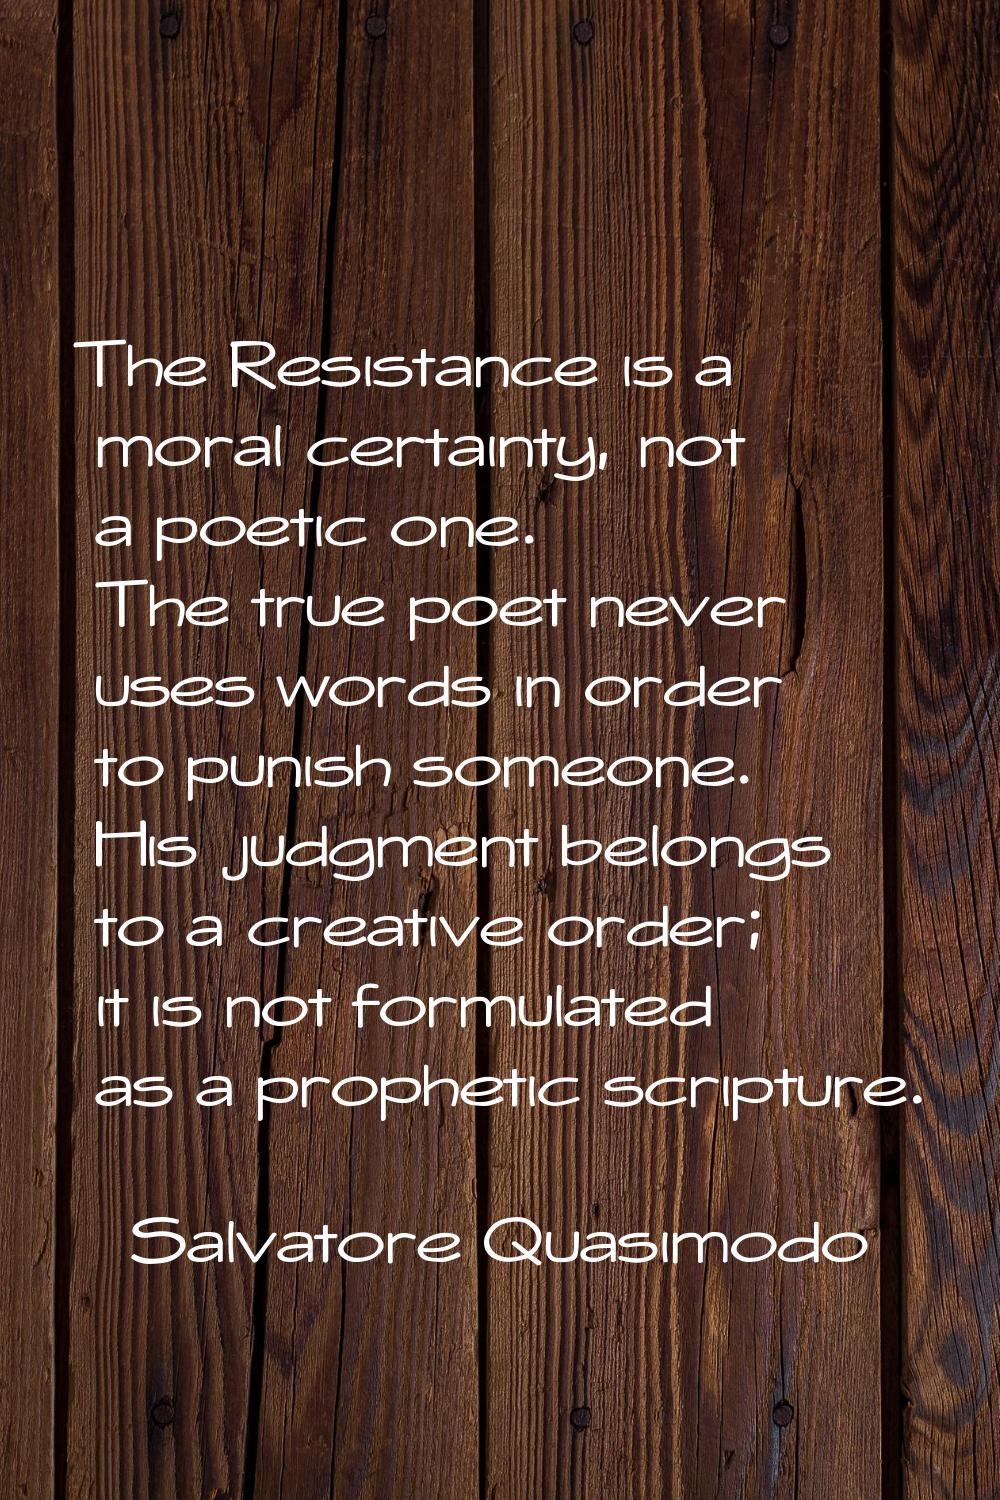 The Resistance is a moral certainty, not a poetic one. The true poet never uses words in order to p